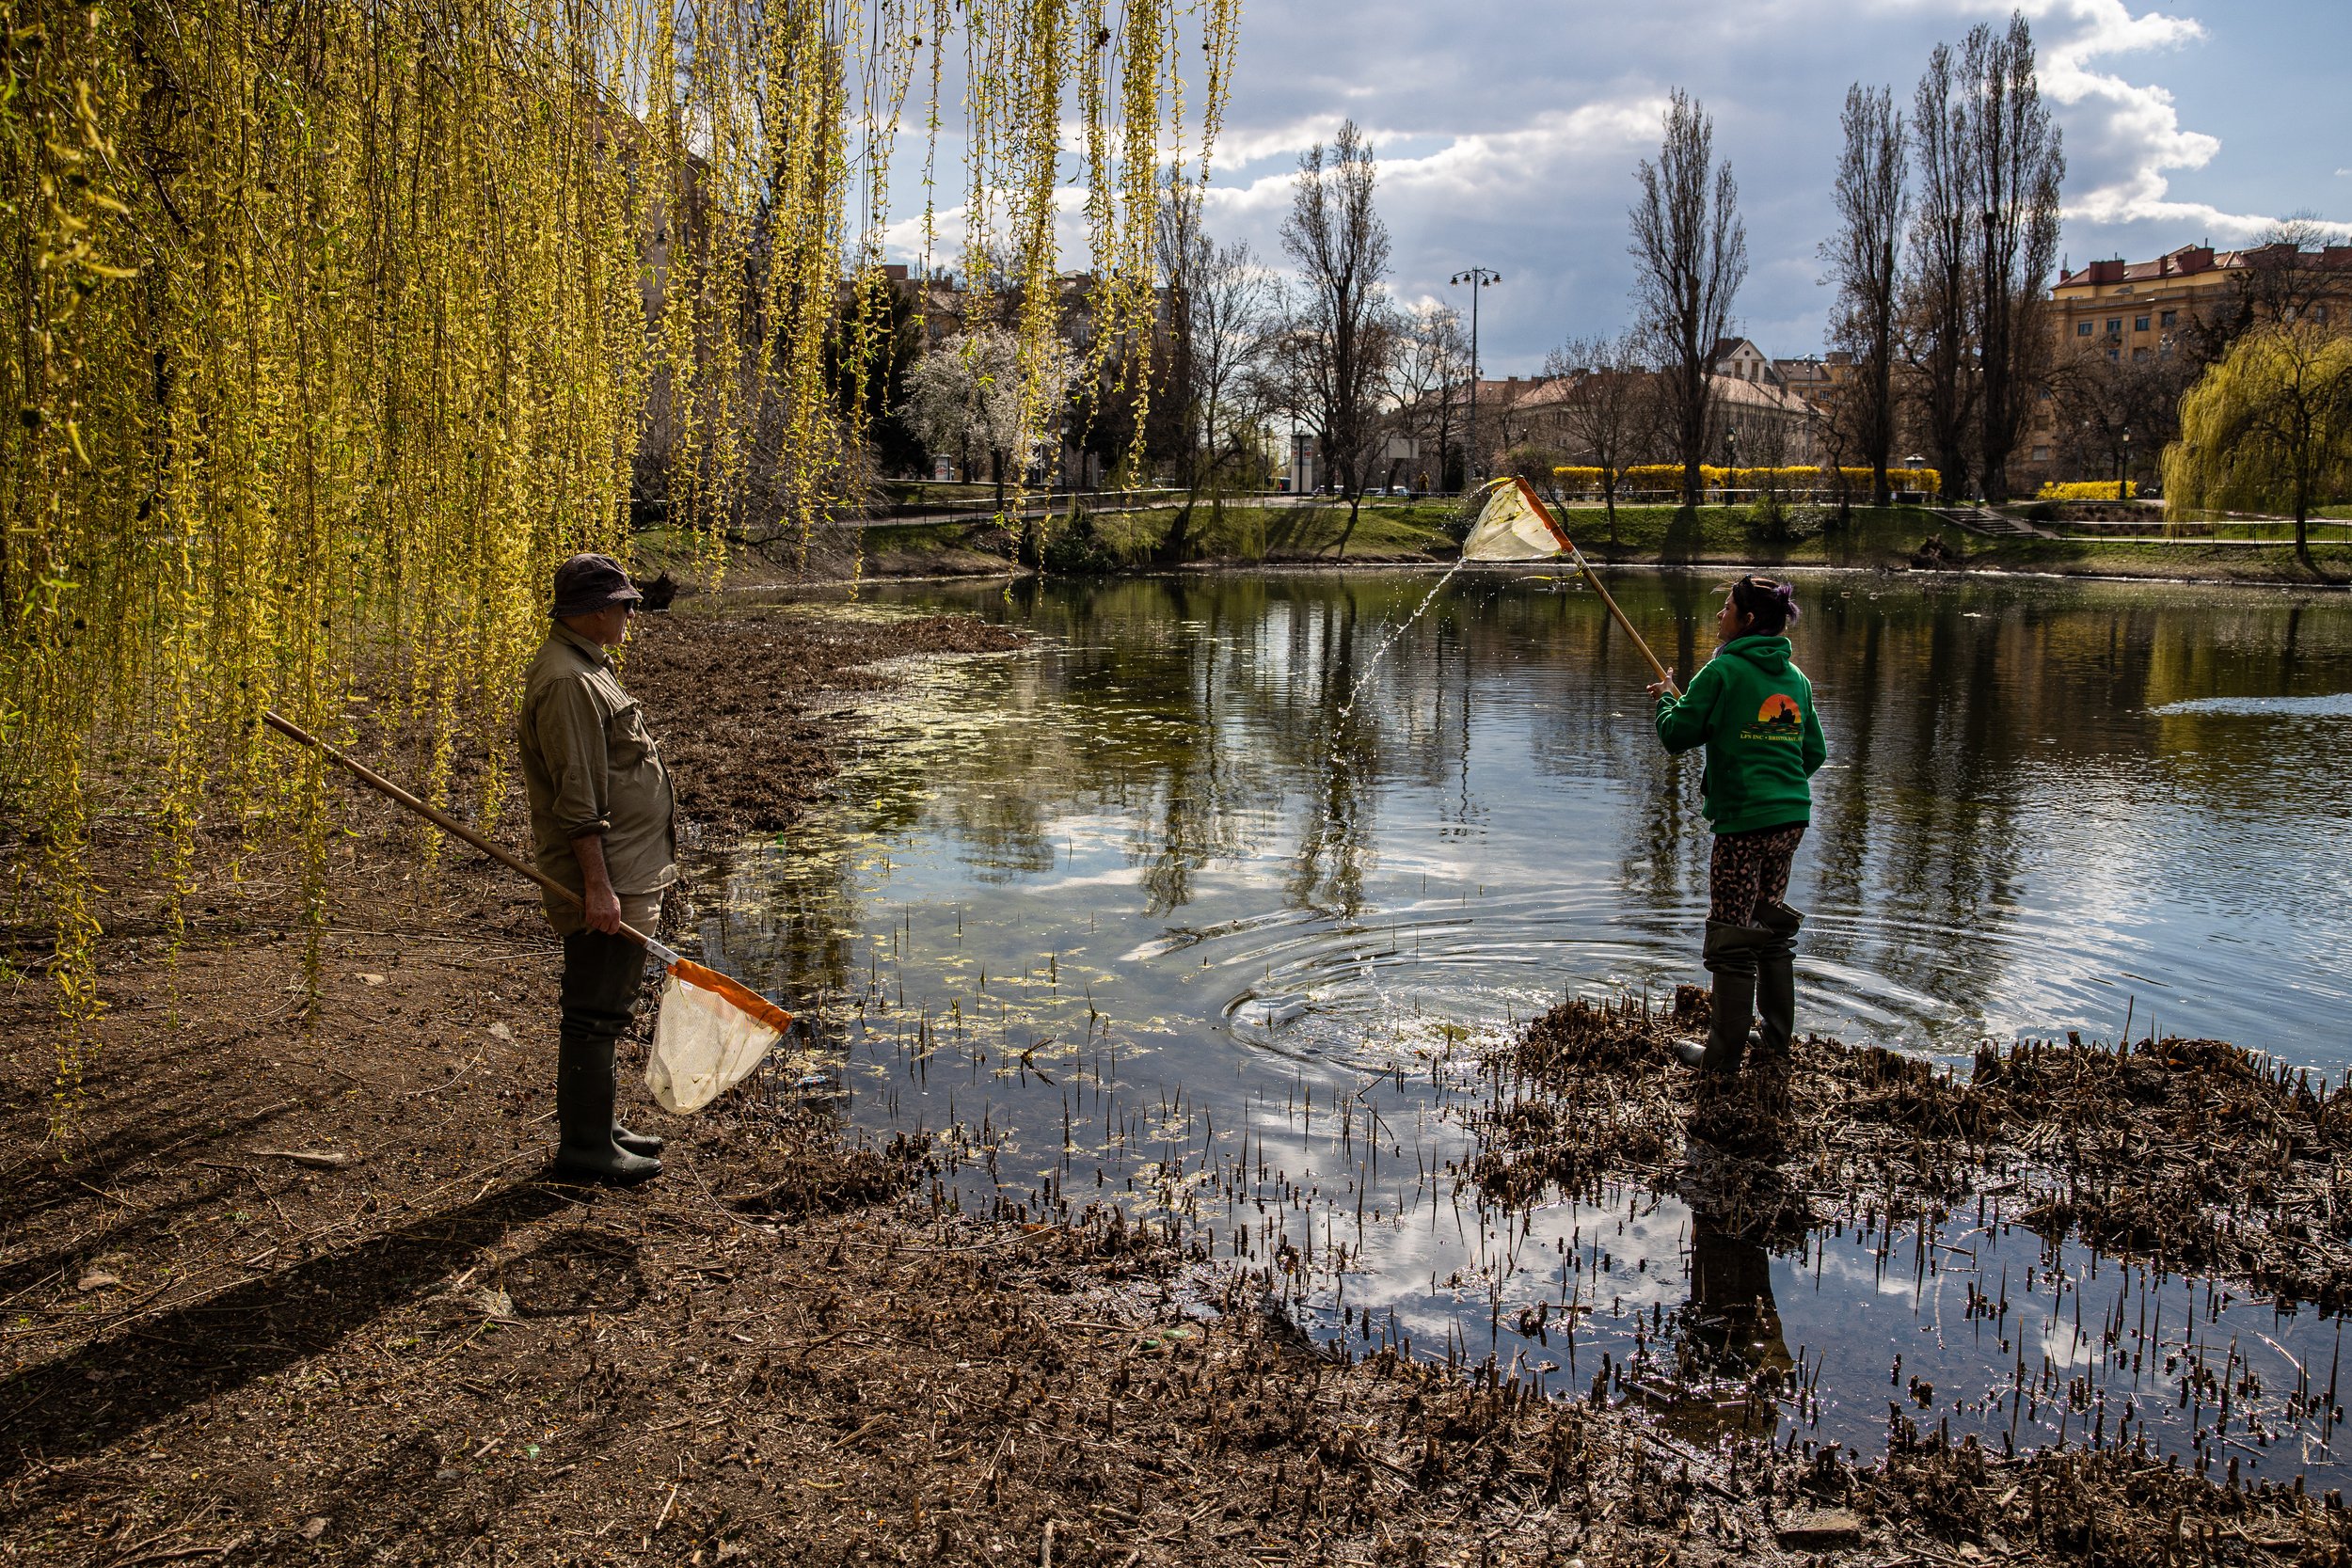  Hungary, Feneketlen lake, Budapest, 21. 03. 2023  Andrew Hamer and his colleague at work Photo: Márton Kállai / NOOR                                        Effects of urbanisation, a drying climate and invasive fish on amphibiancommunities in Hungar